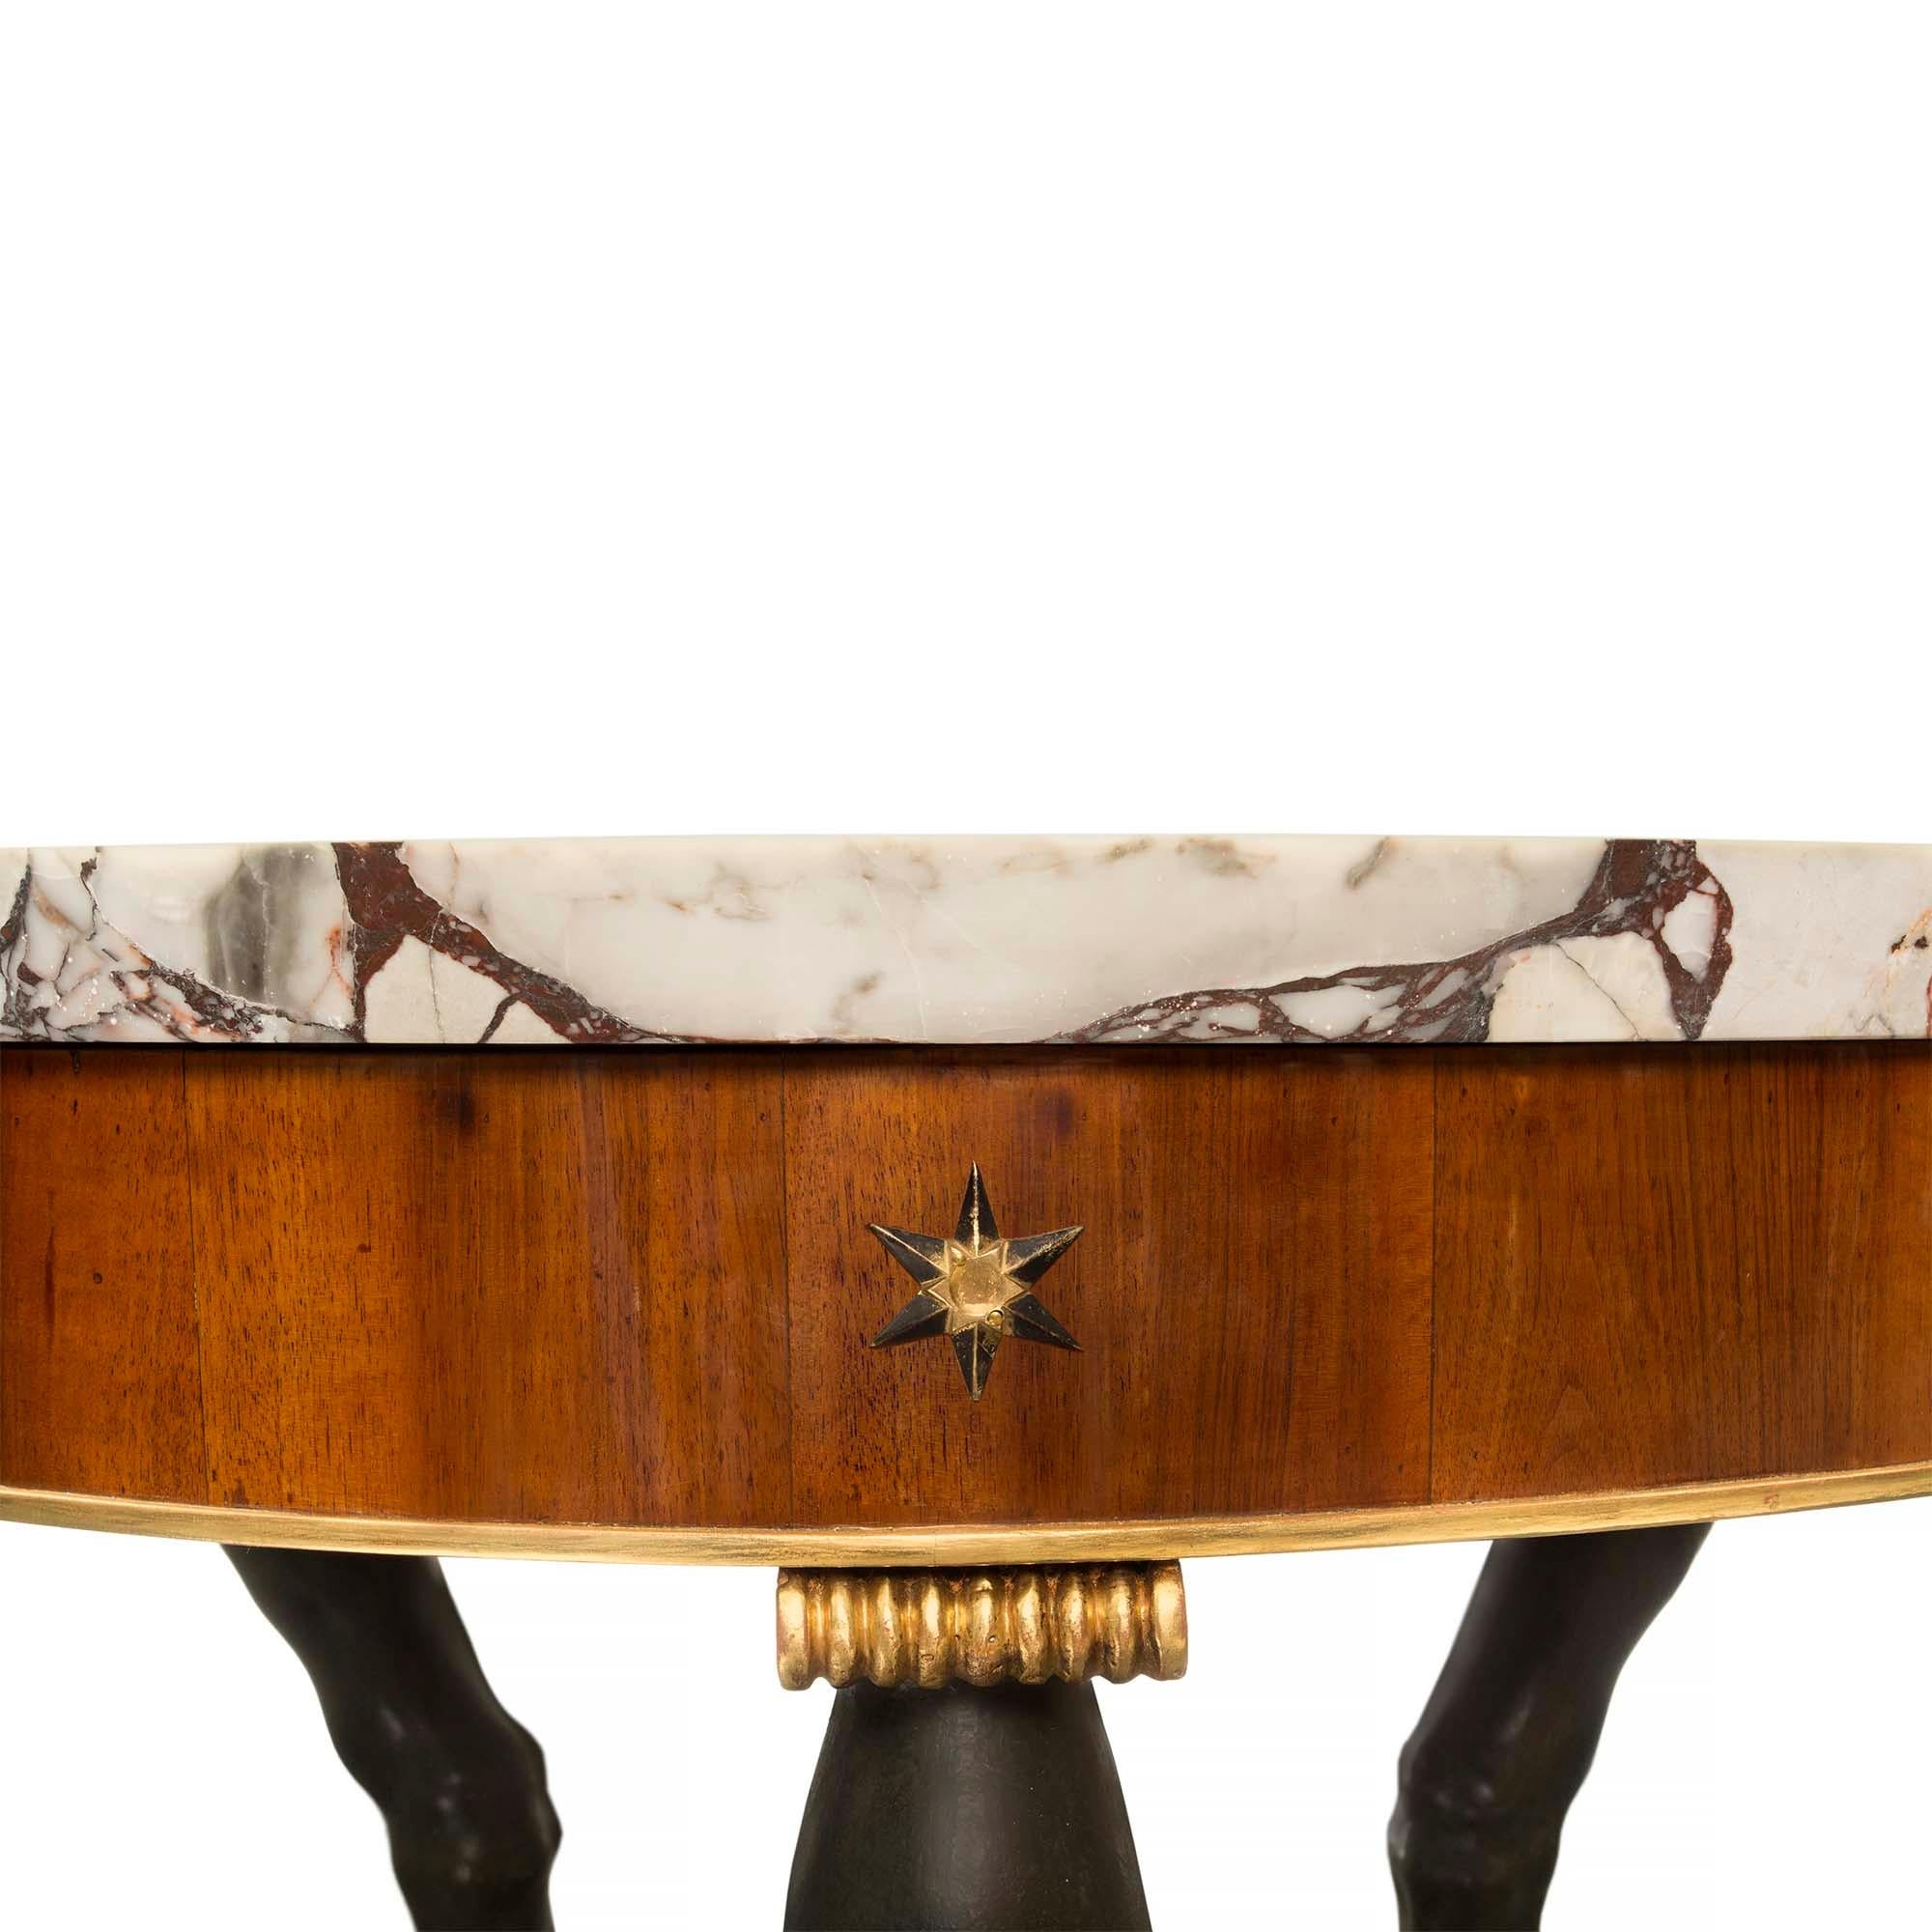 Italian 19th Century Neo Classical Walnut, Giltwood and Marble Center Table For Sale 1